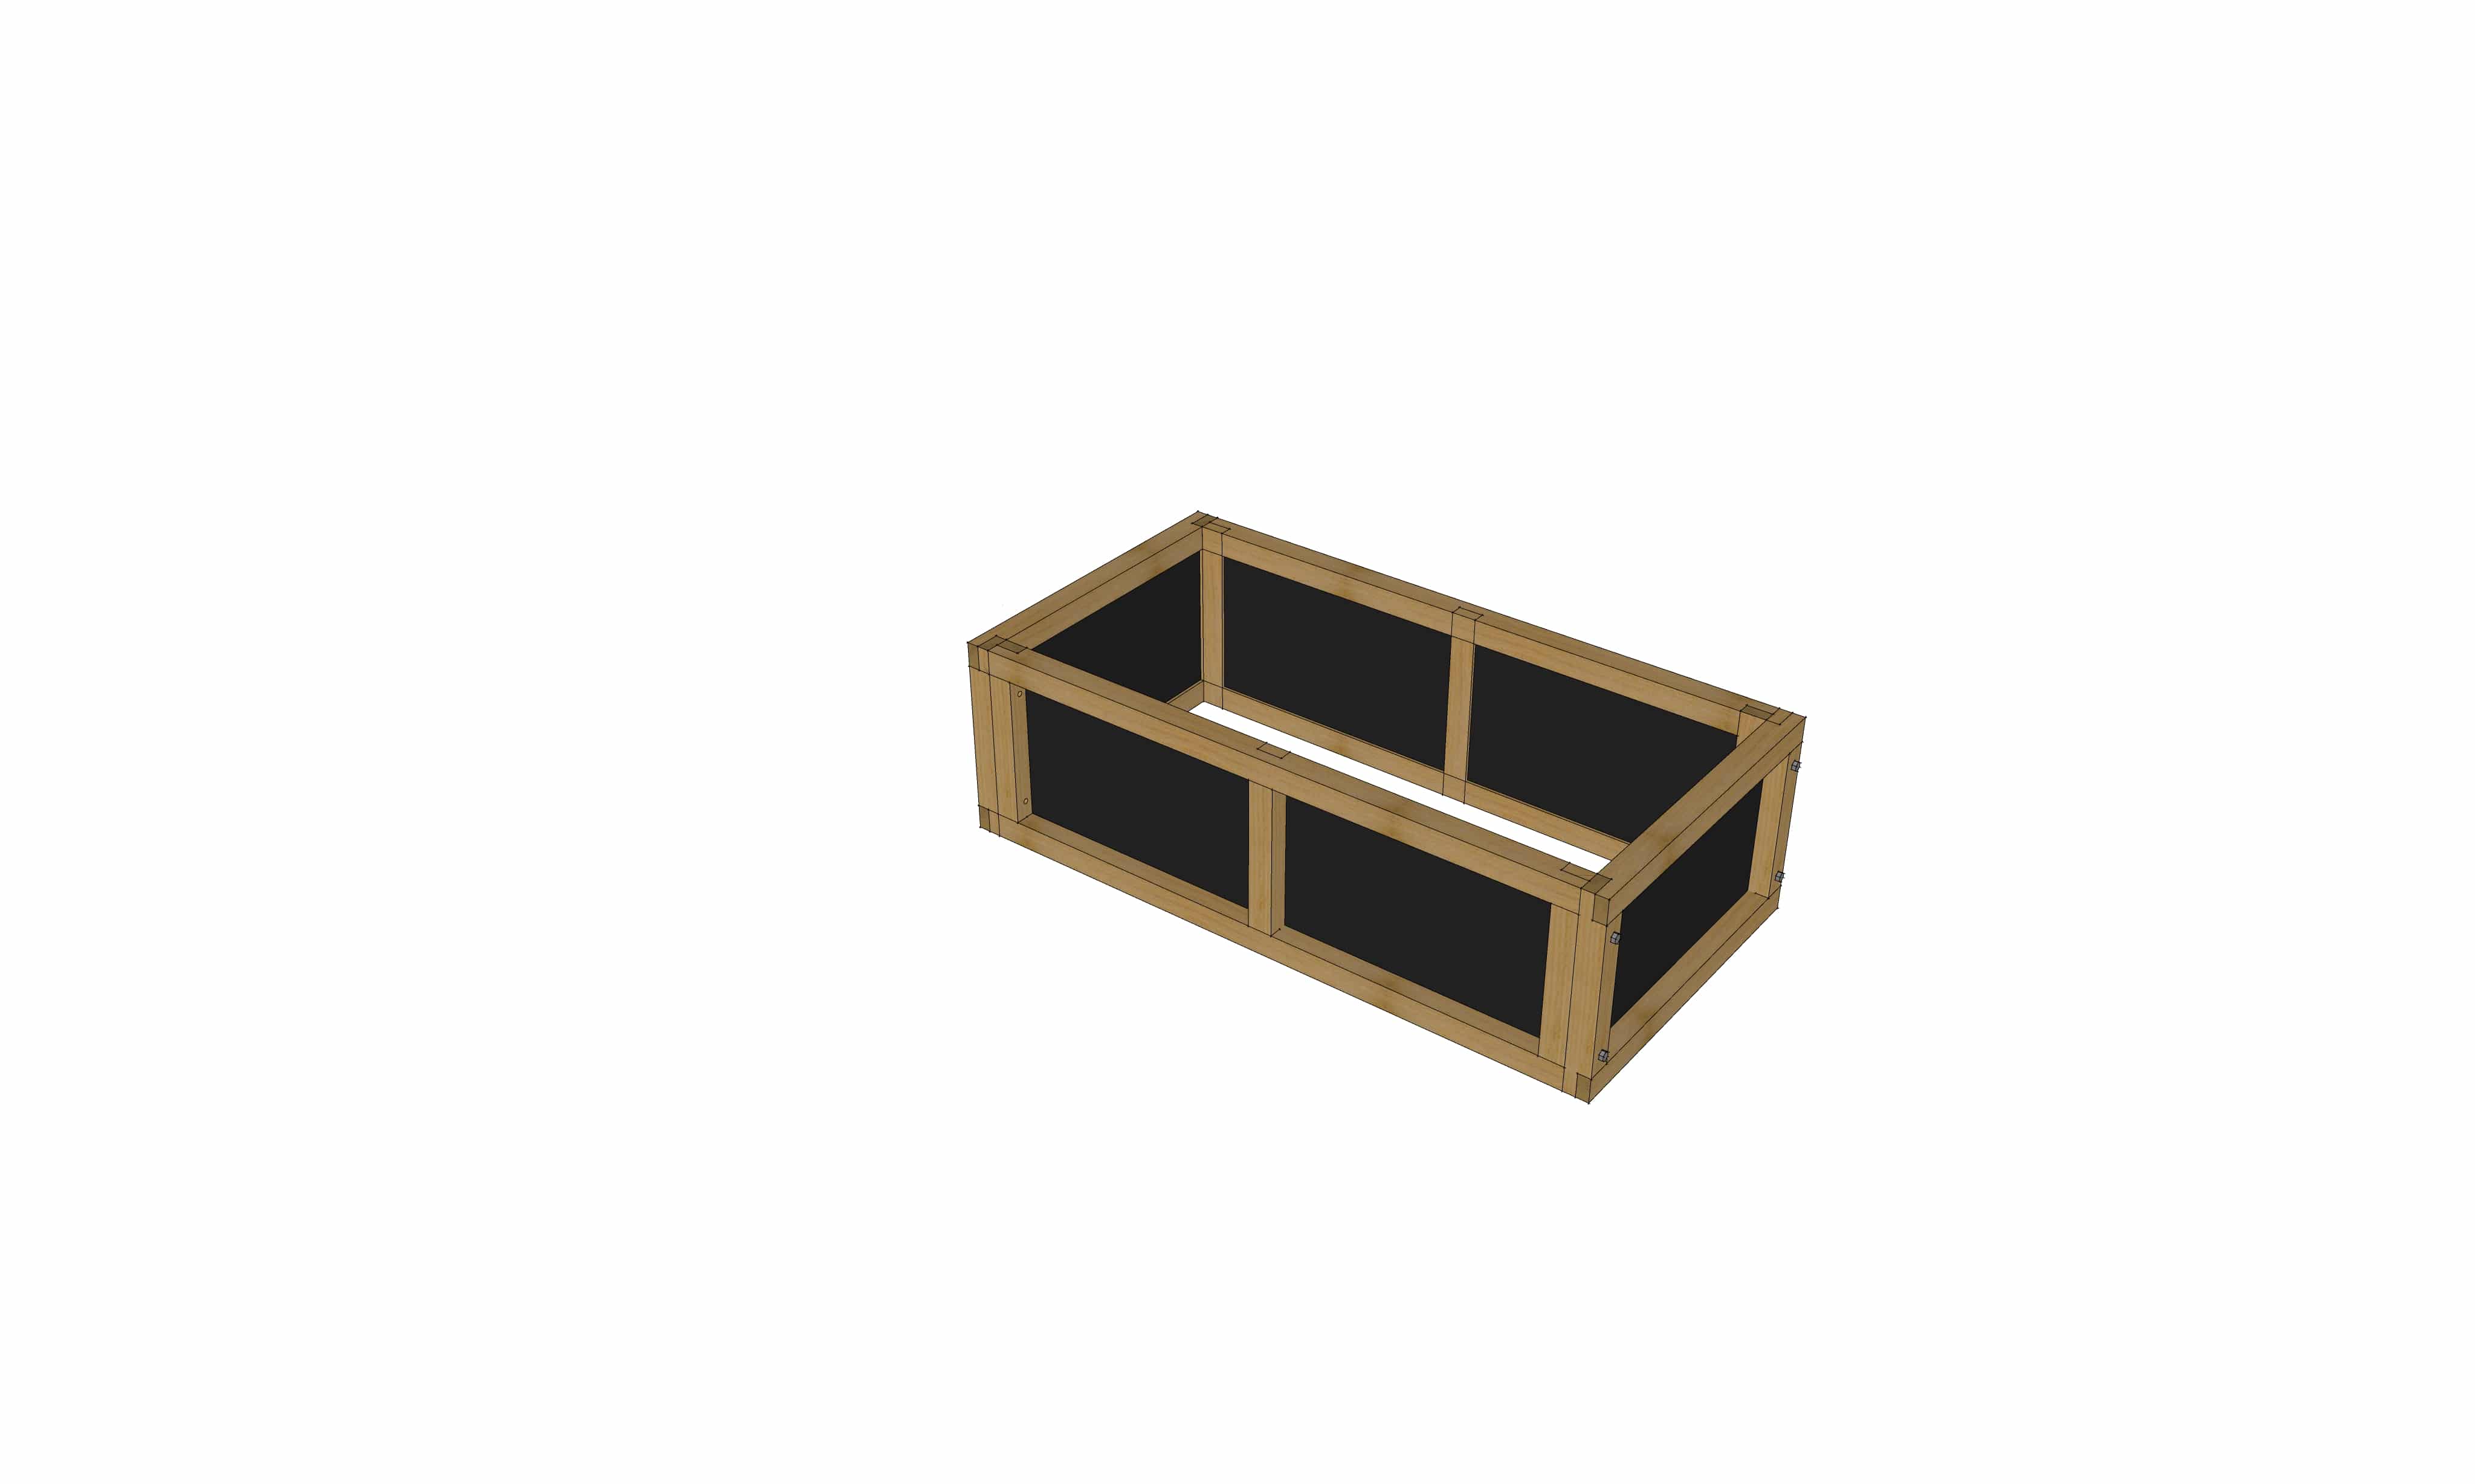 24" Wide Modular Raised Garden Bed | 1 Module. Four panel set measures 23½" wide by 47" long. Complete with all needed hardware. Cedar, food safe, built by Roost & Root.